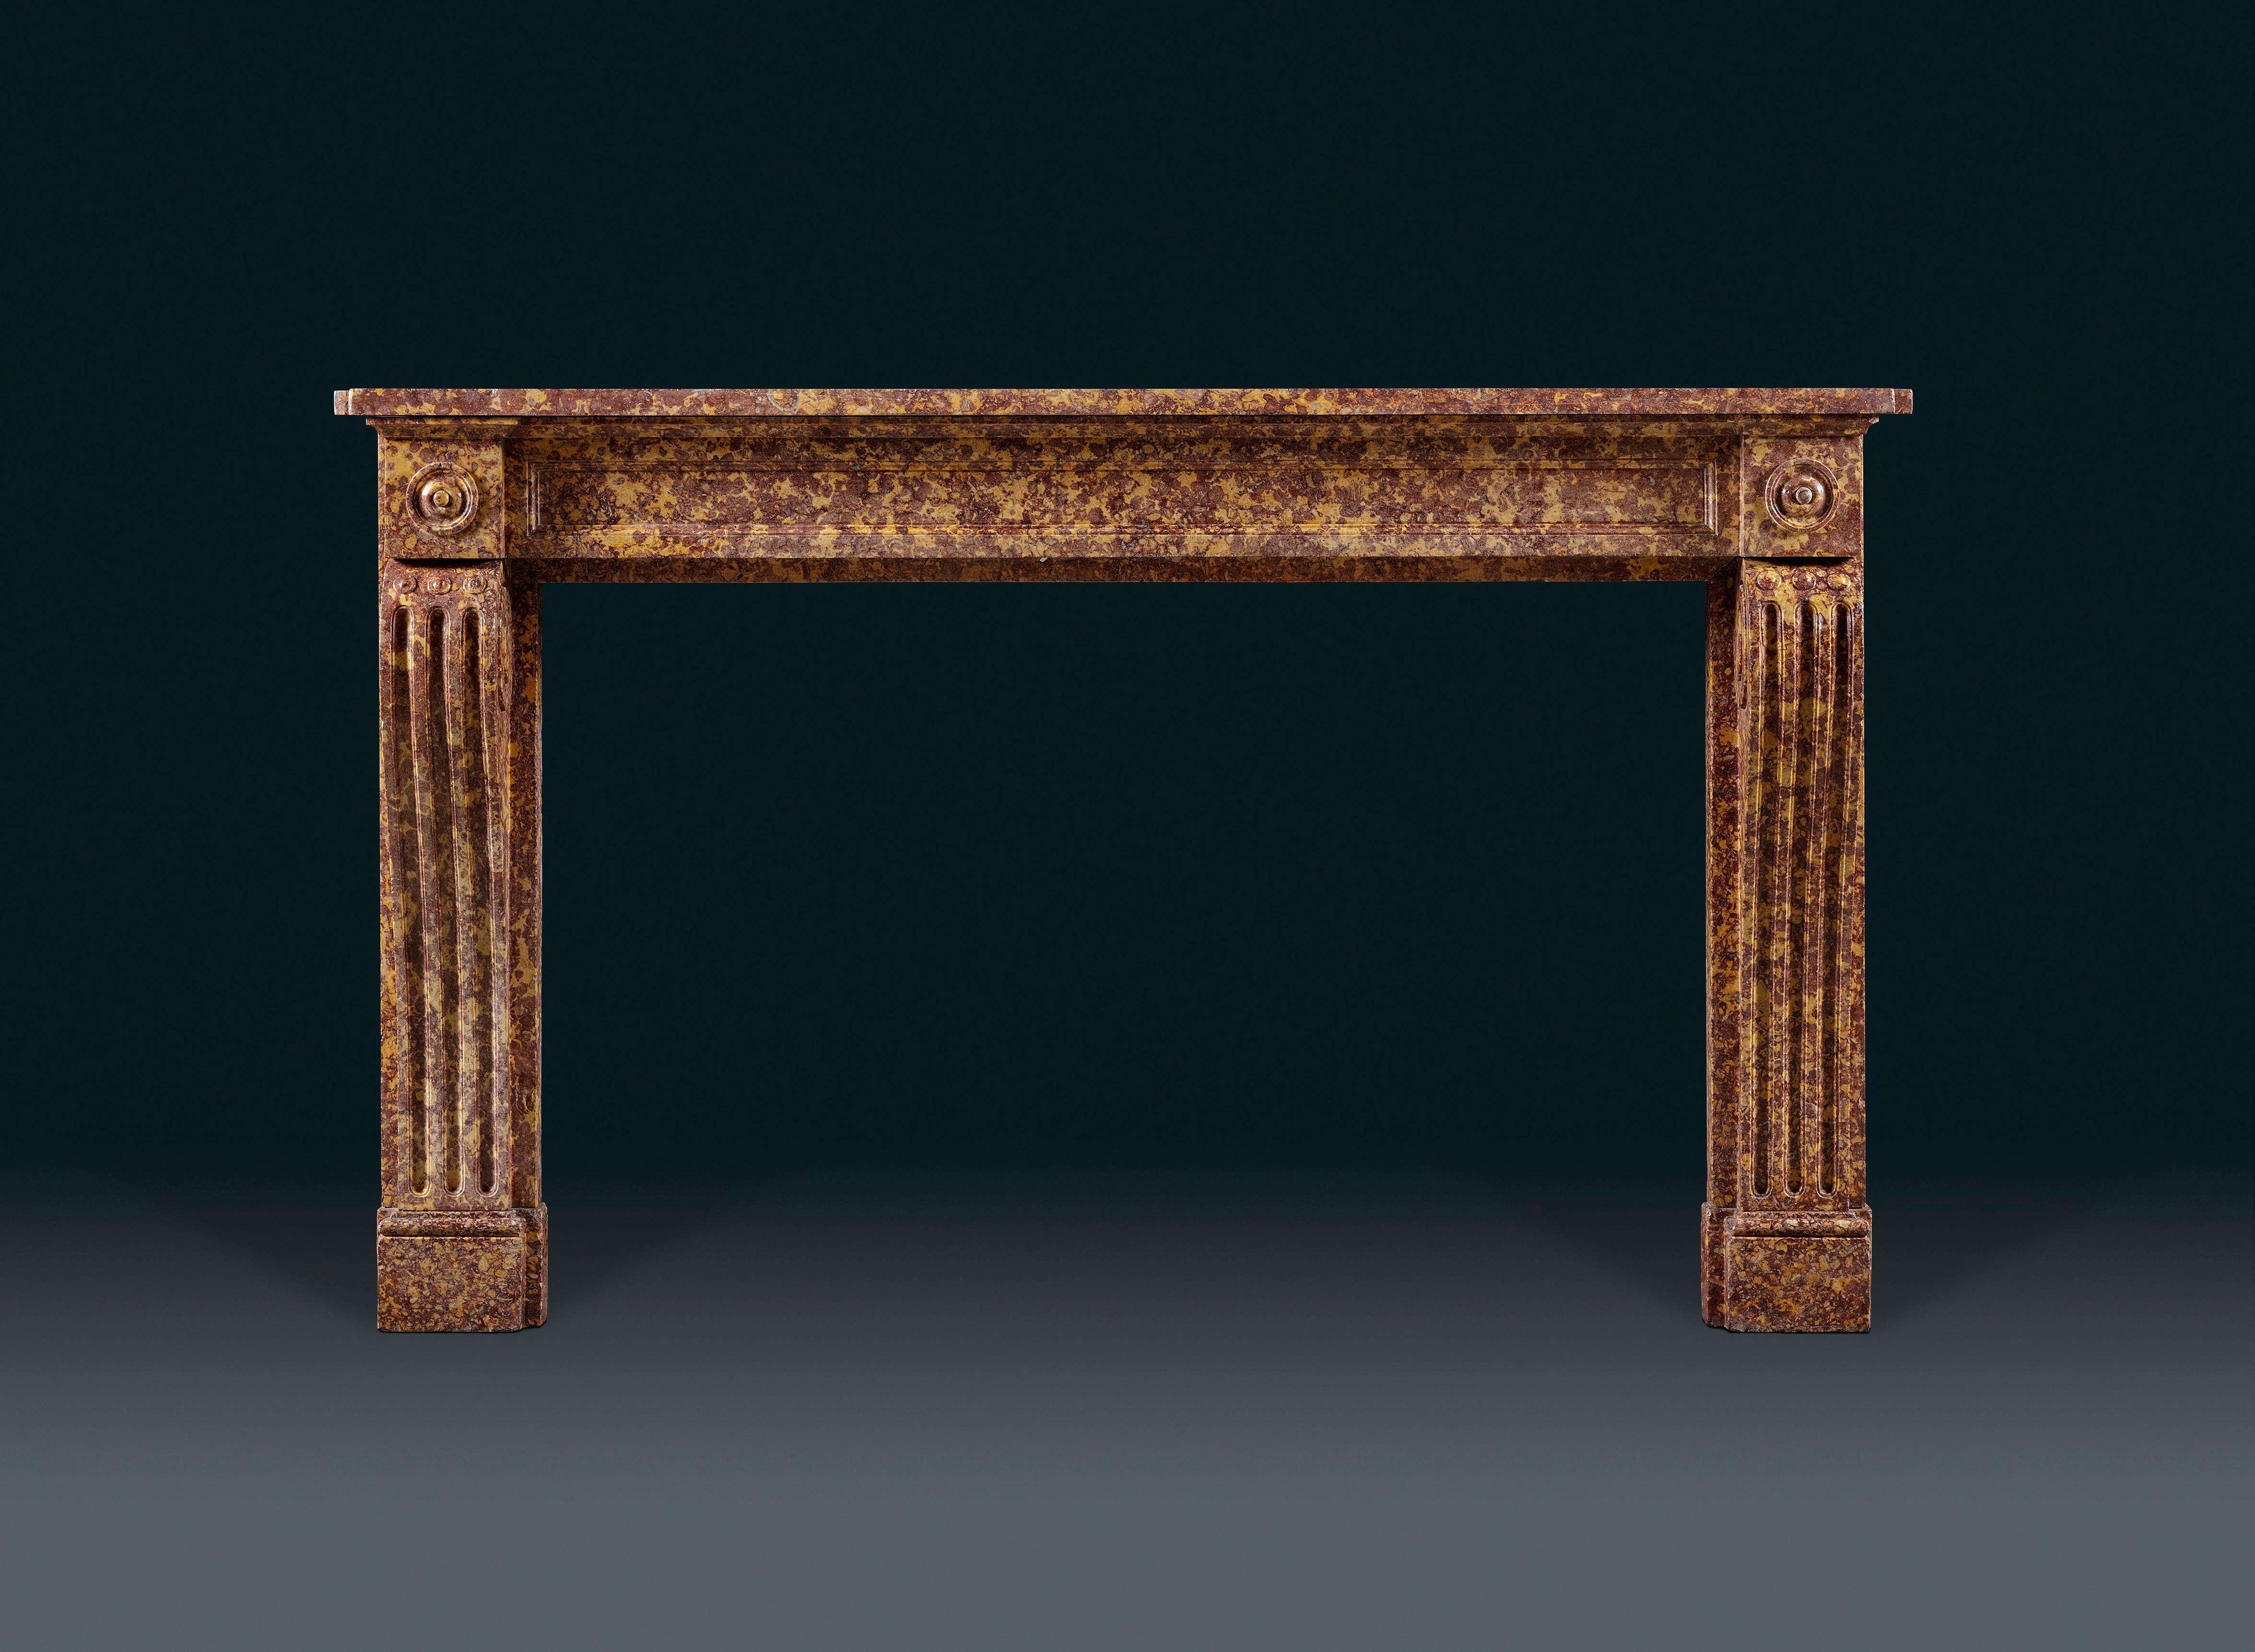 A 19th century French Brocatello marble chimneypiece of good color of Louis XVI style with rectangular shelf above the plain inset frieze which is flanked by square blockings carved and decorated with rounded paterae. The scrolled console jambs